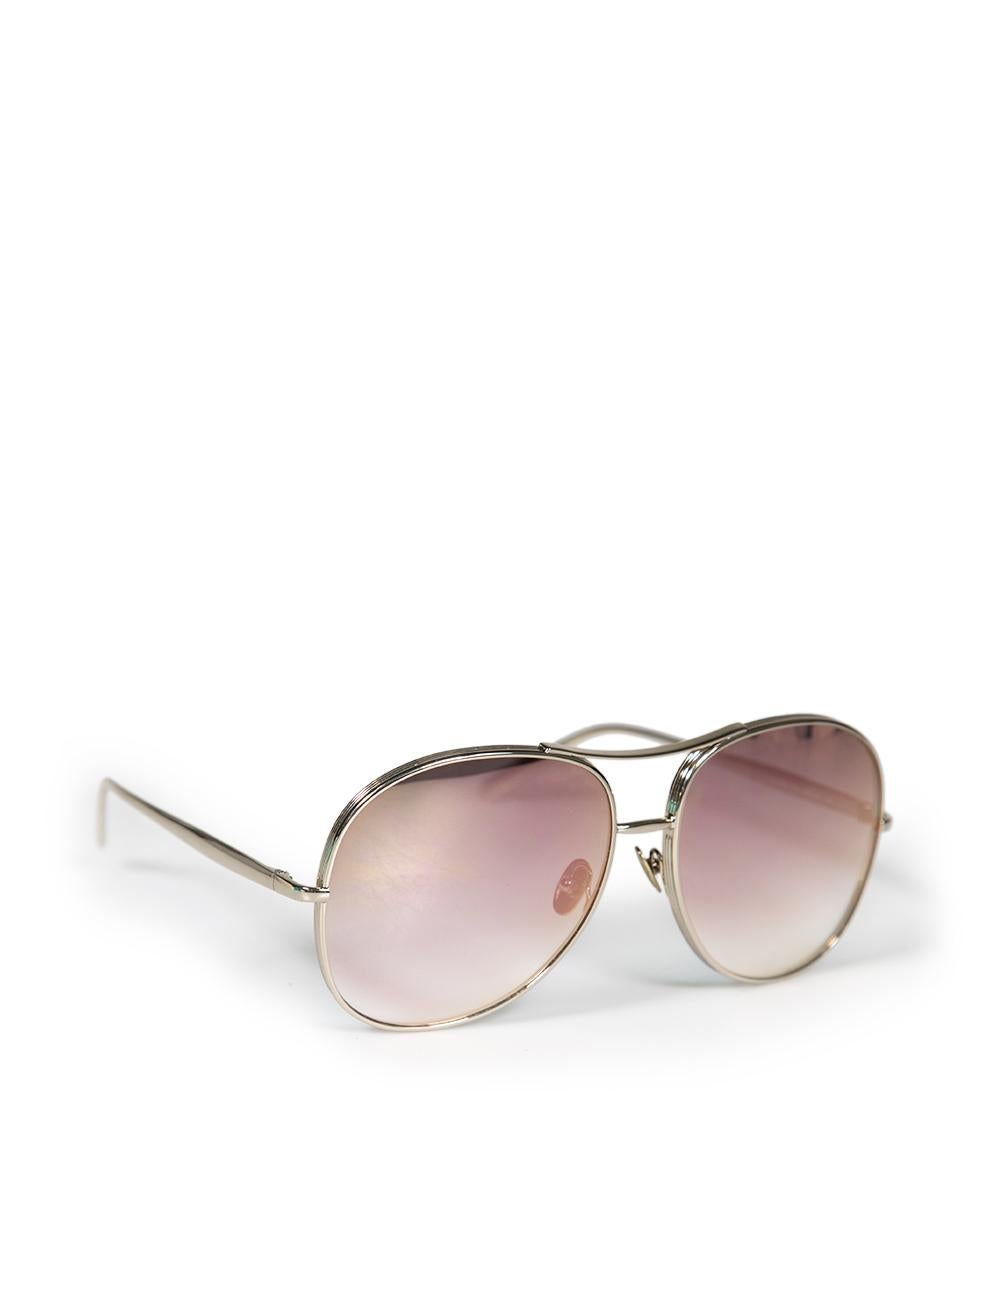 CONDITION is Good. Minor wear to sunglasses is evident. Light tarnishing to hardware of nose pads on this used Chloé designer resale item. This item comes with original case.
 
 
 
 Details
 
 
 Silver
 
 Metal
 
 Aviator sunglasses
 
 Gradient pink